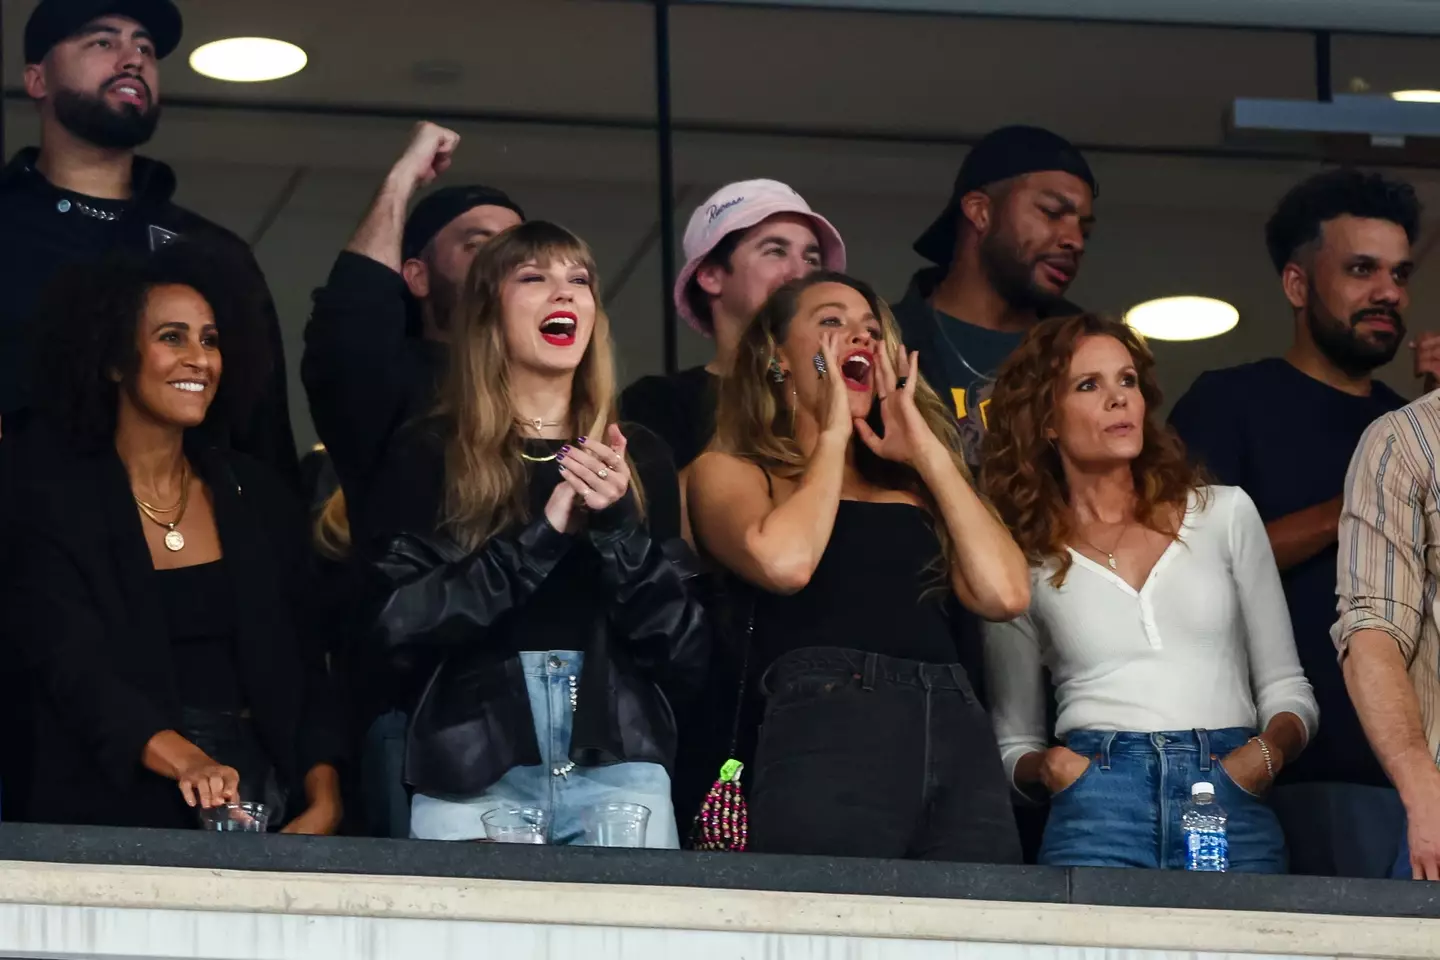 Taylor Swift was recently seen at a recent Kansas City Chiefs game with Blake Lively.